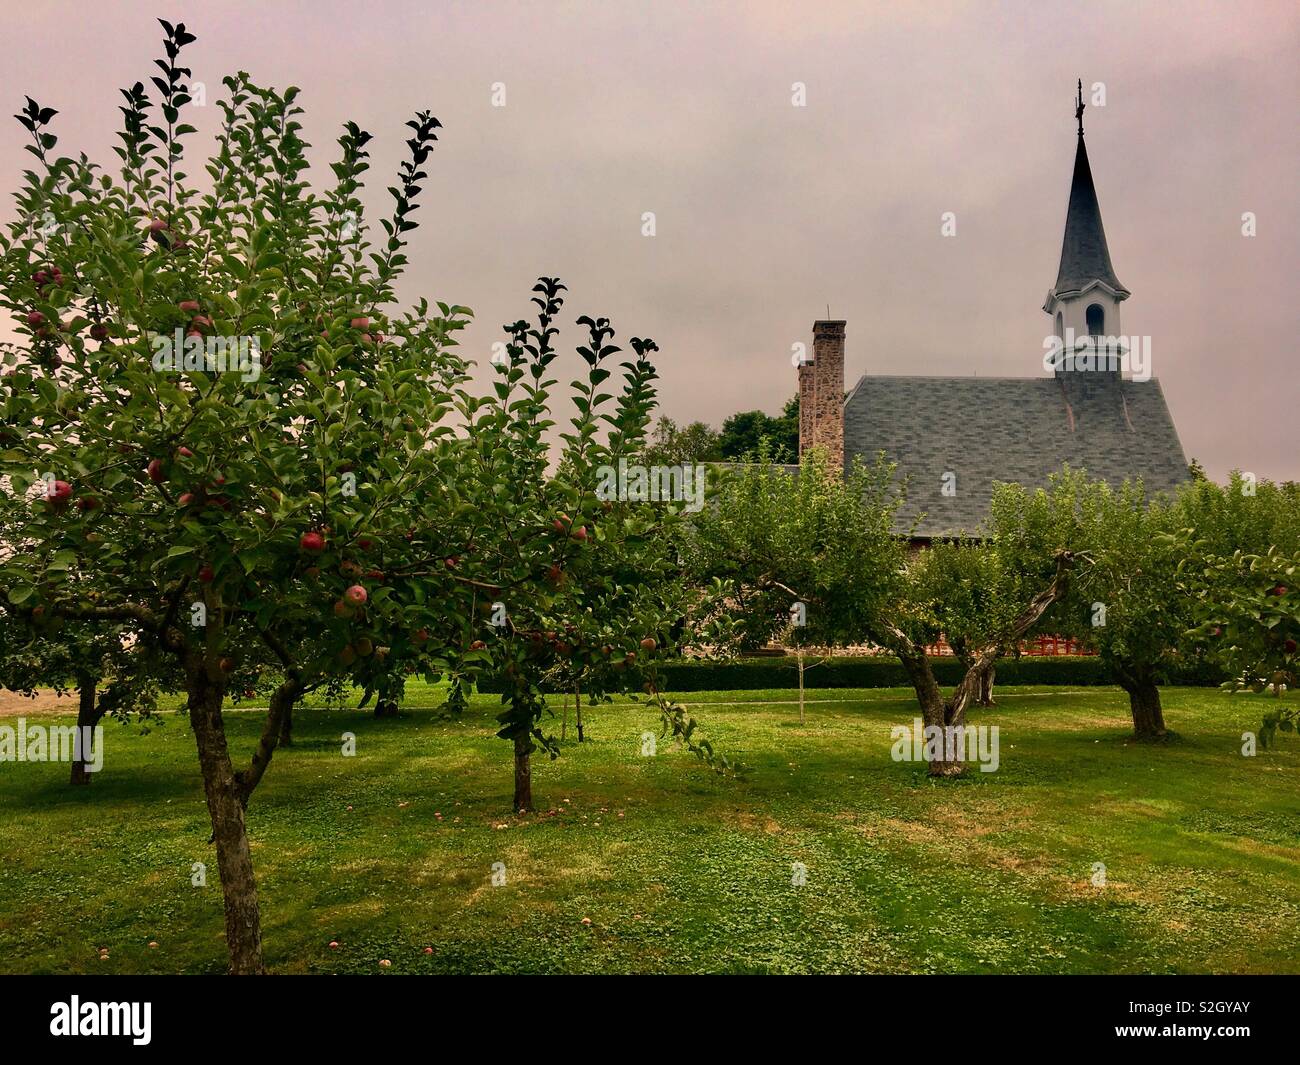 Apple grove con Arcadian chiesa in background Foto Stock